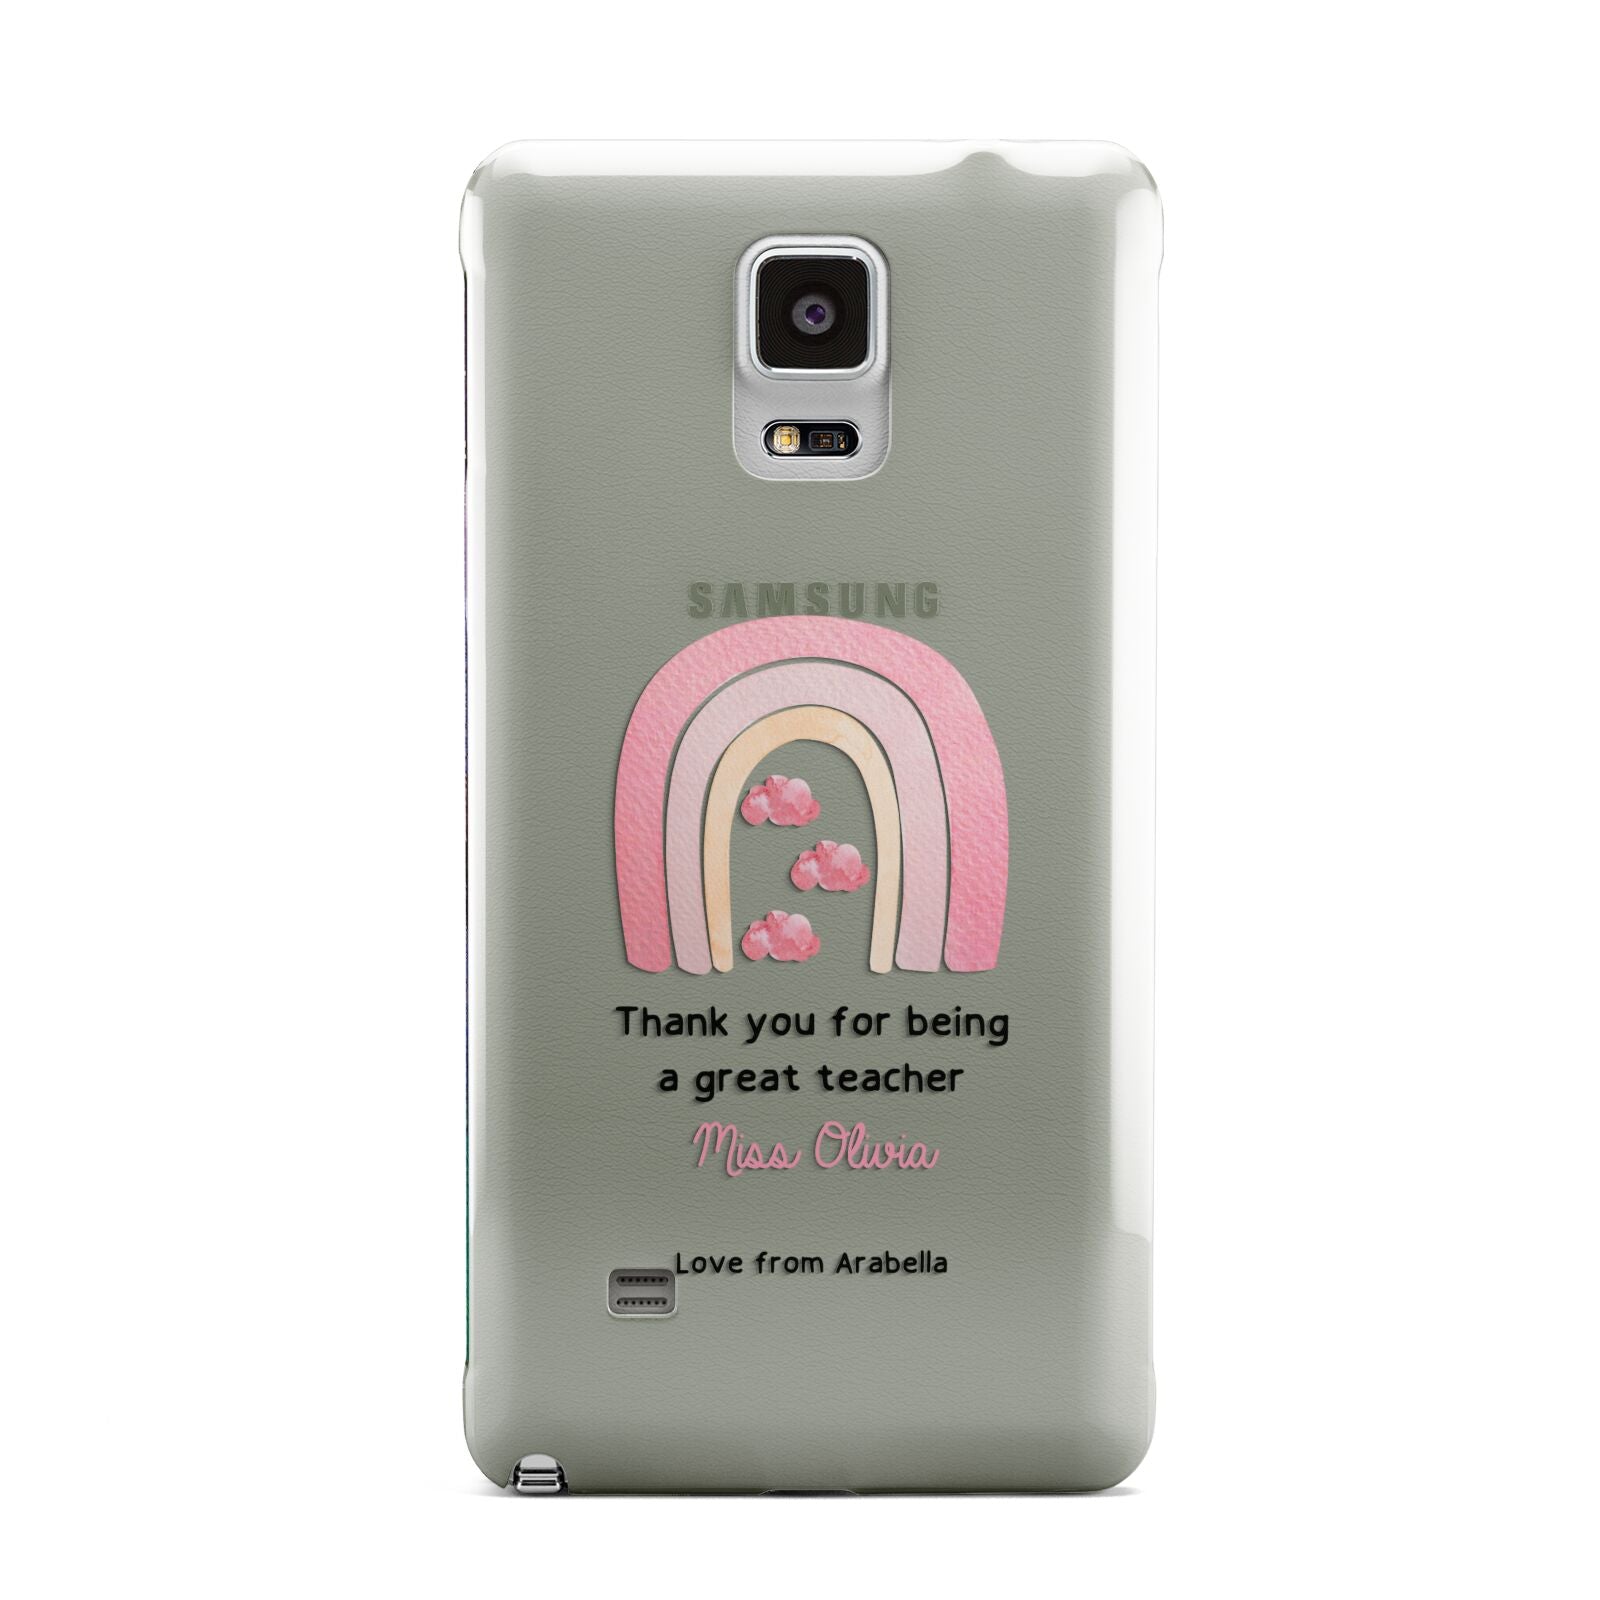 Personalised Teacher Thanks Samsung Galaxy Note 4 Case